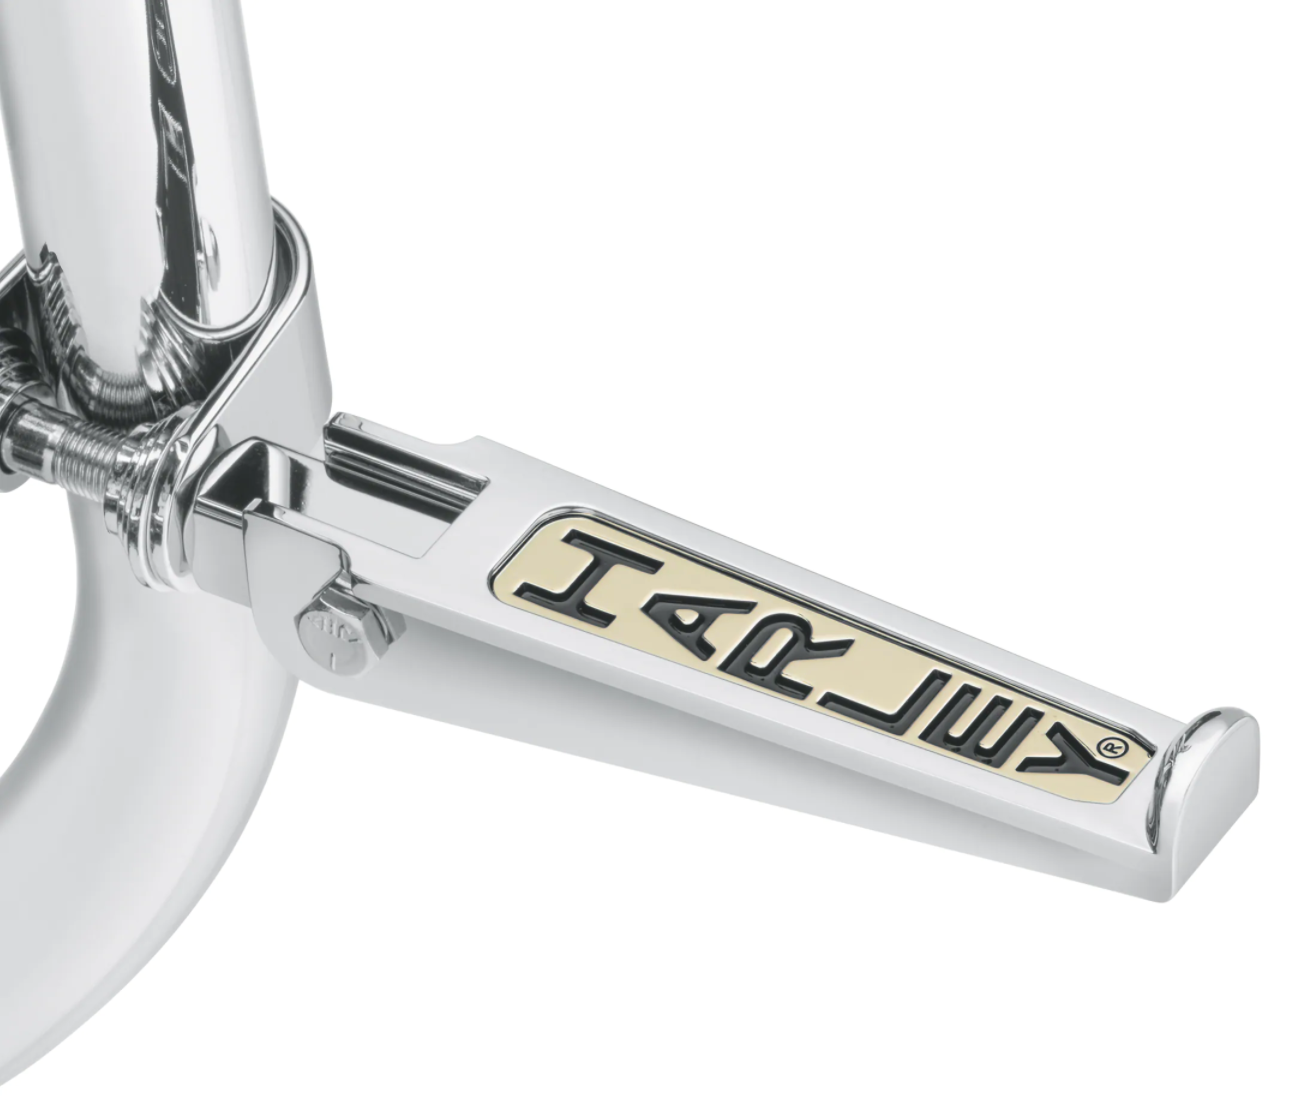 Harley-Davidson® Custom Harley Scripted Footpegs - 49102-86T.  These chrome-plated footpegs sport a gold-tone inlay of the Harley-Davidson® graphic.